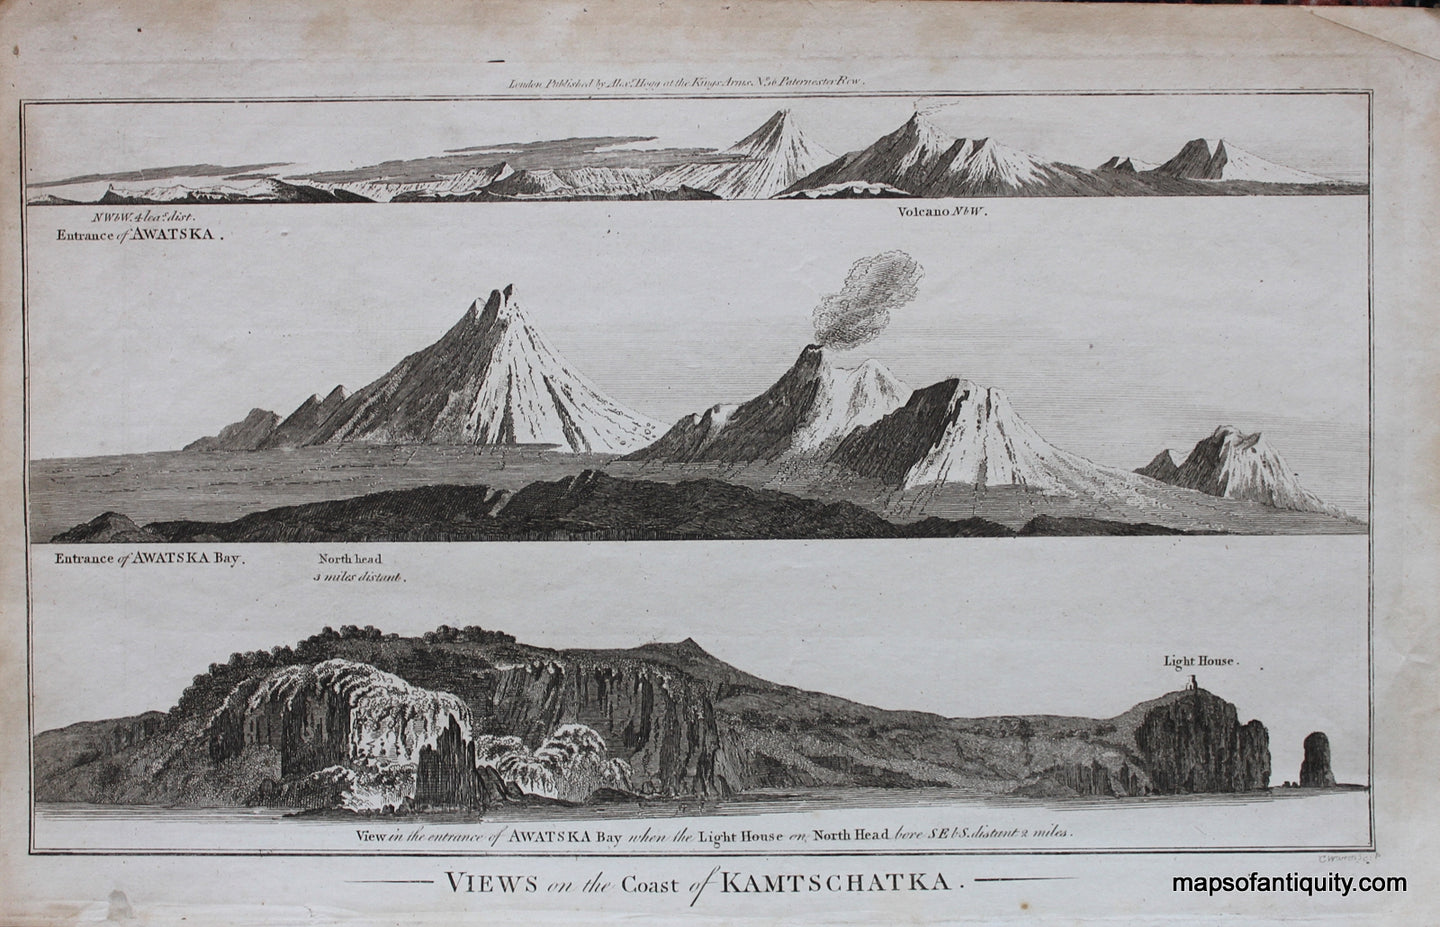 Black-and-White-Engraved-Antique-Views-Views-of-the-Coast-of-Kamtschatka.-Asia-Russia-in-Asia-1785-Cook-Maps-Of-Antiquity